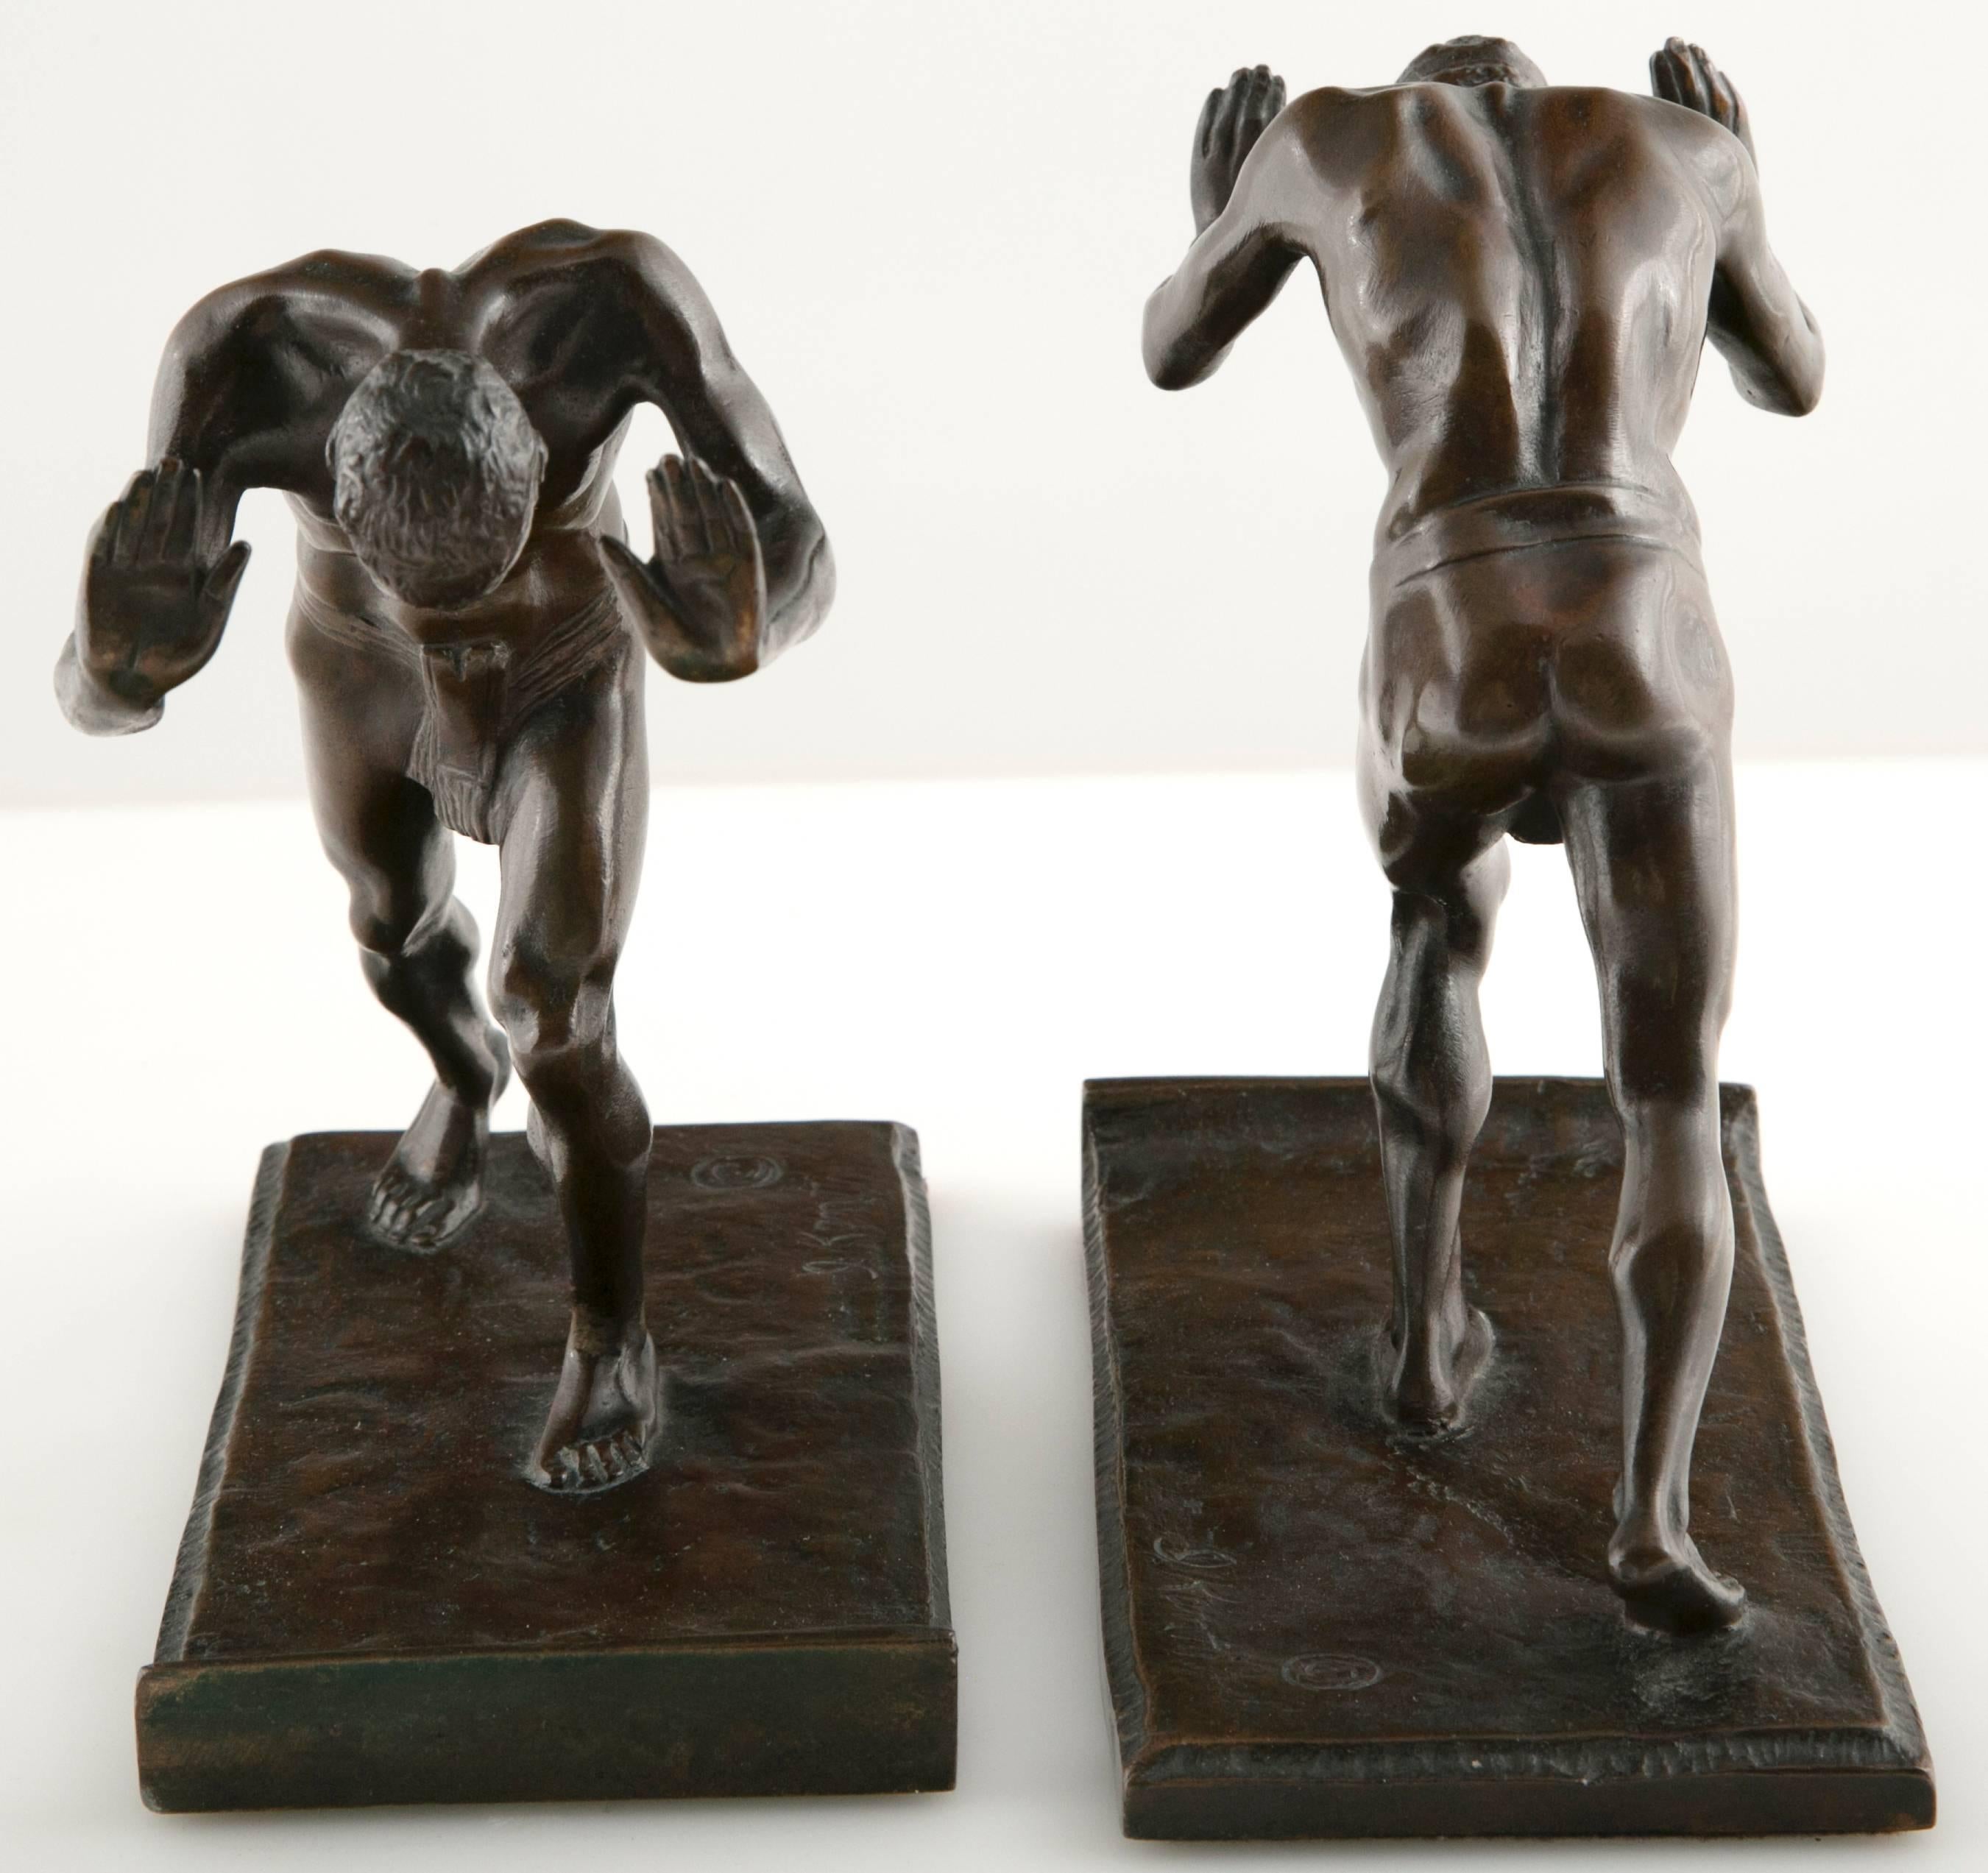 A pair of bronze Art Deco bookends by Isidore Konti in the form of muscular men. Gorham Co. Foundry.